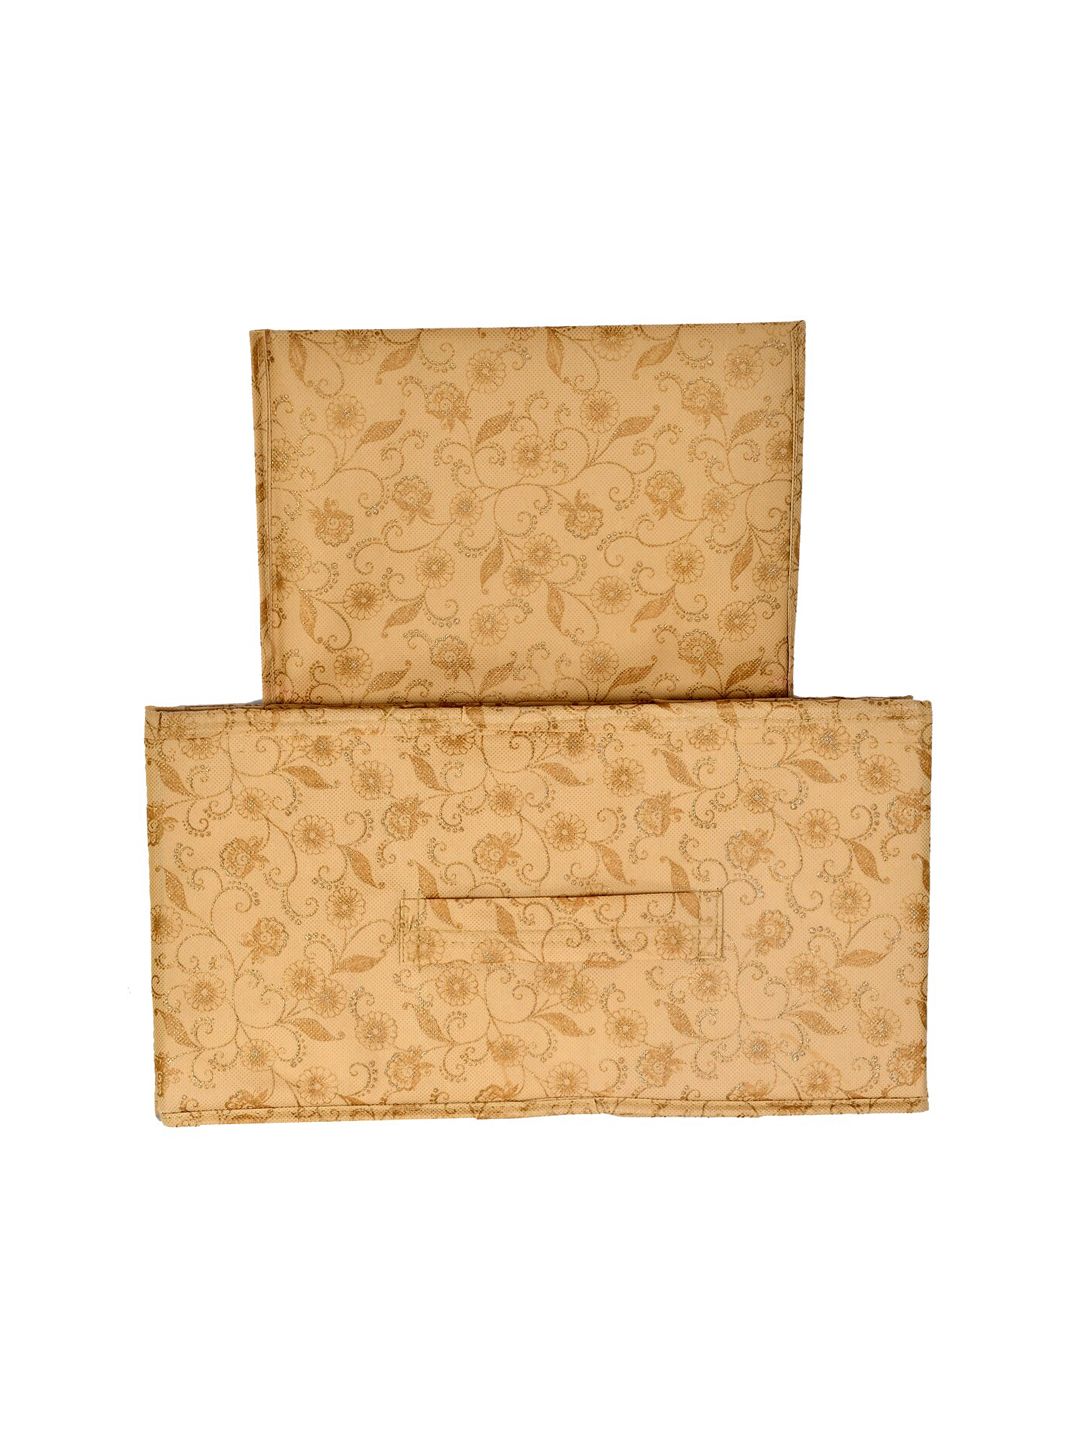 Kuber Industries Set Of 2 Beige & Gold-Toned Floral Printed Non-Woven Fabric Drawer Storage Organiser Price in India